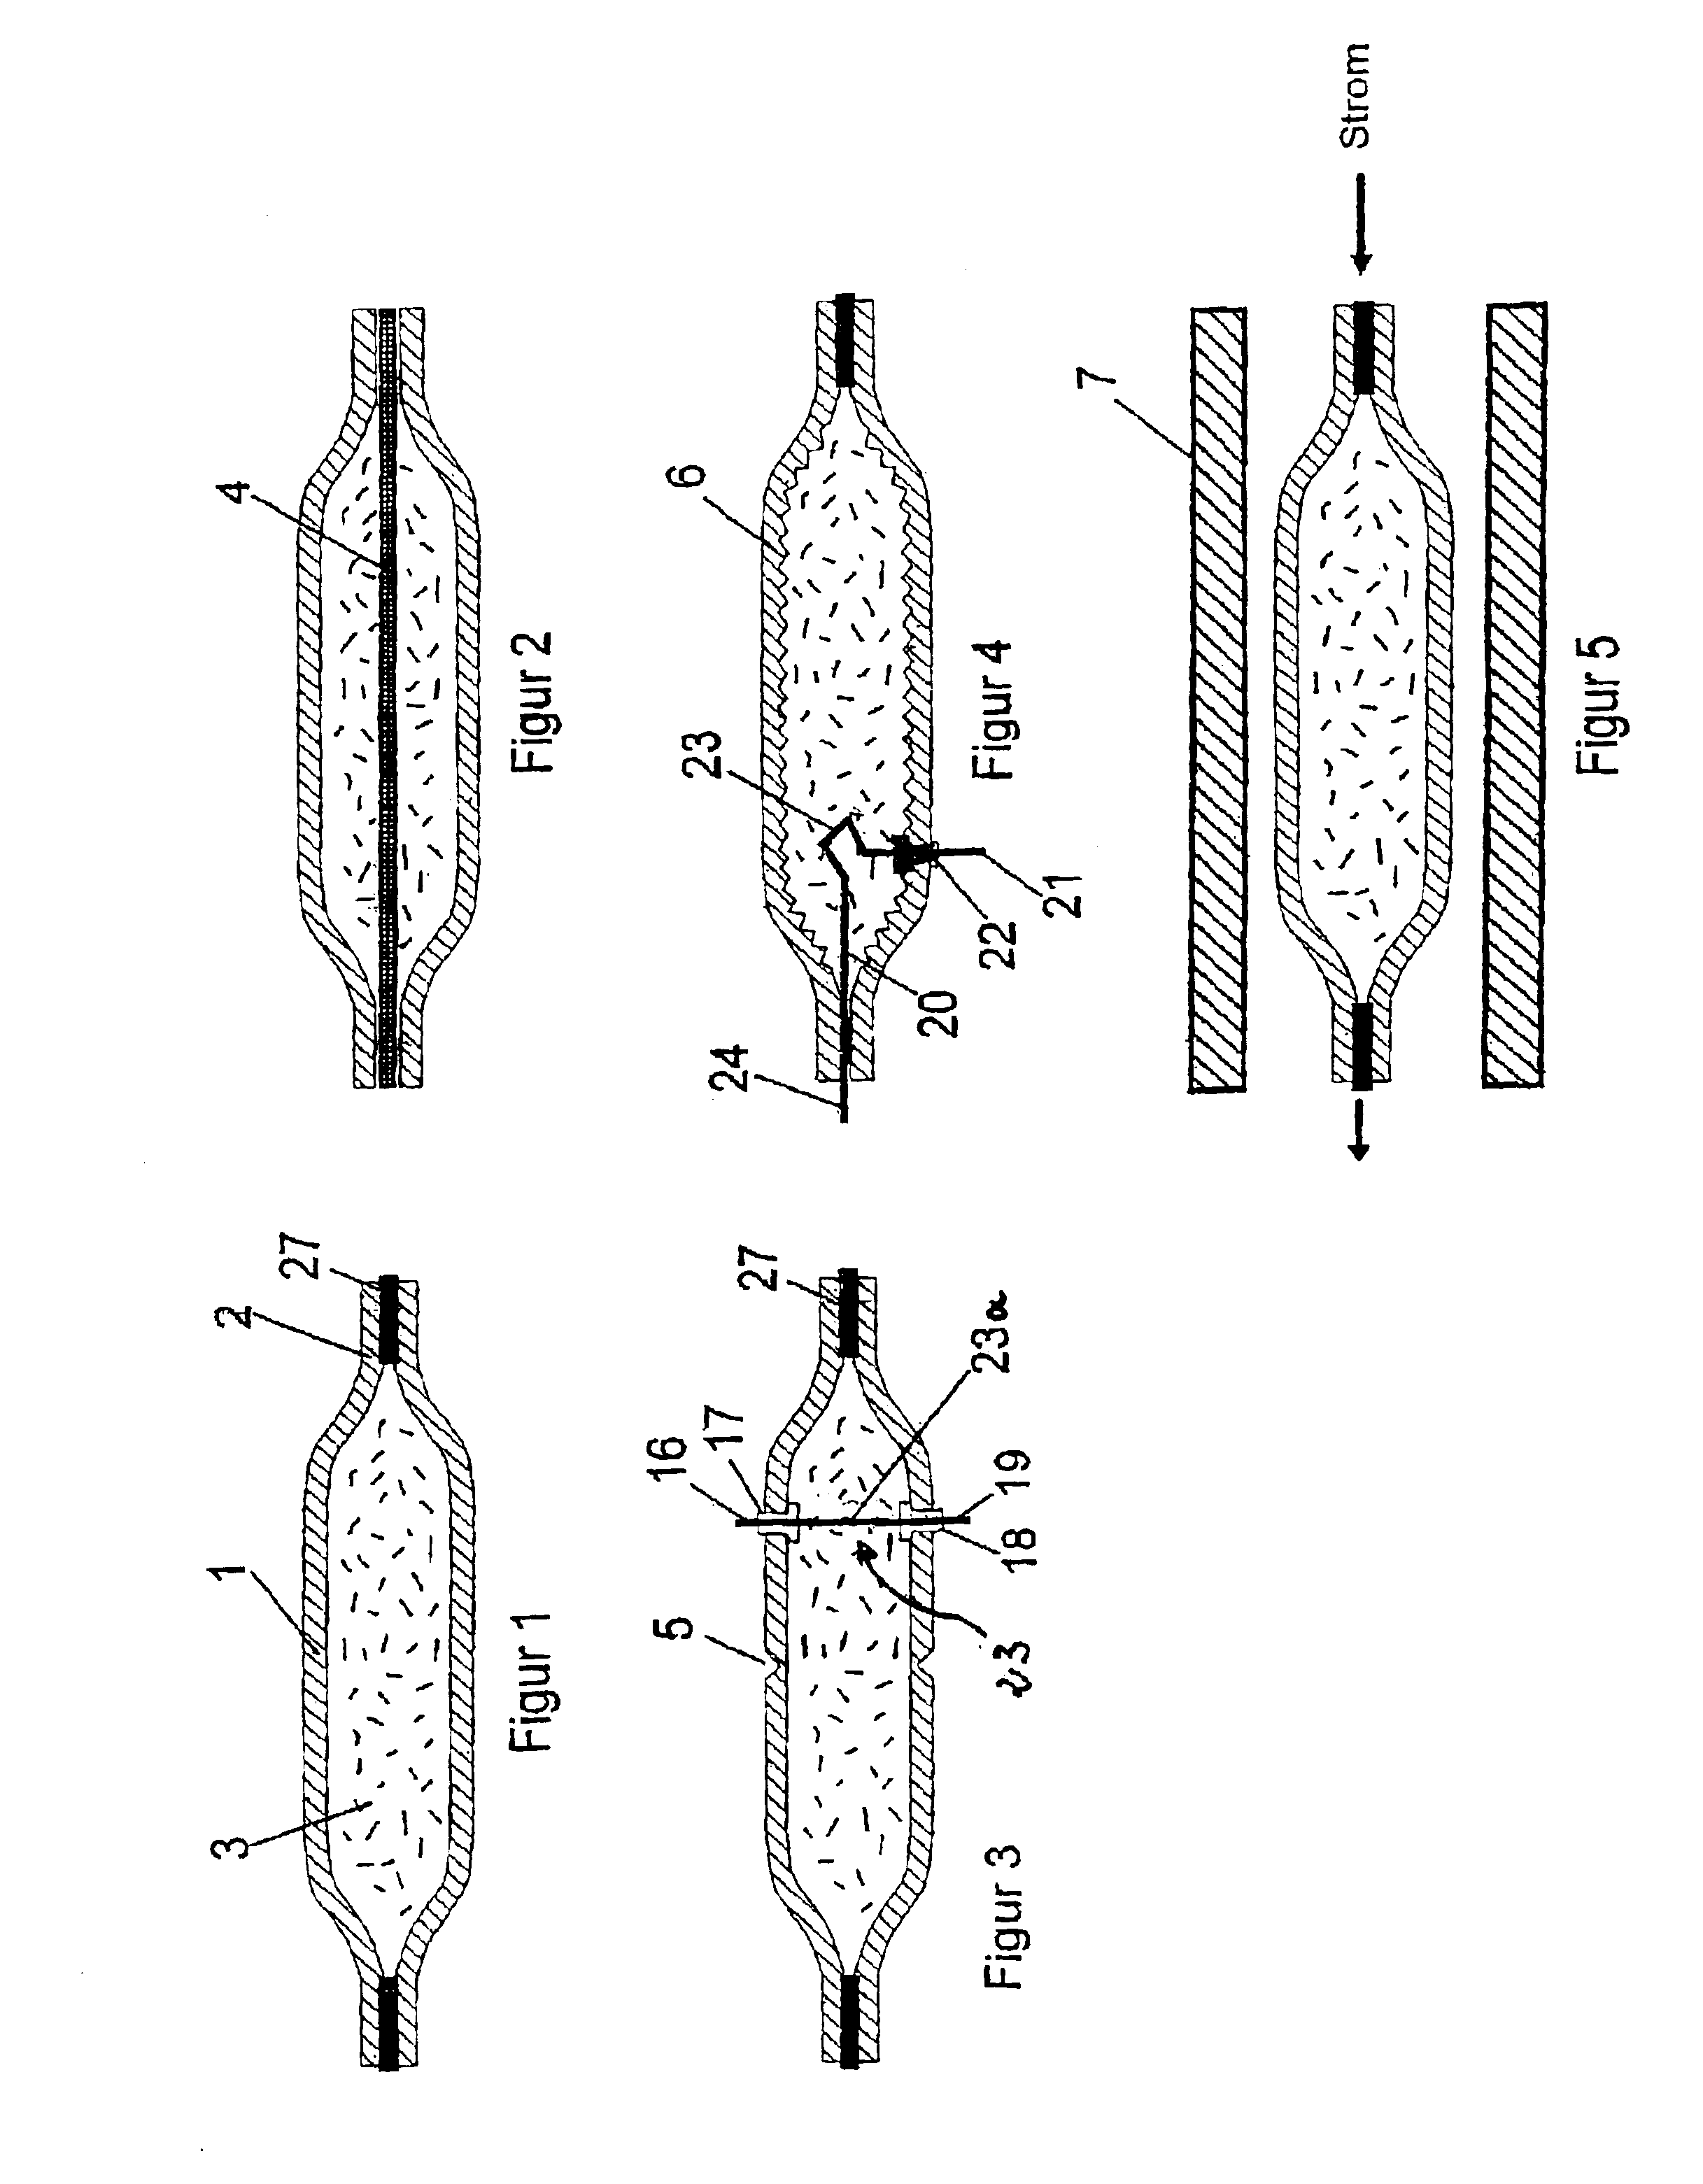 Pyrotechnic safety element